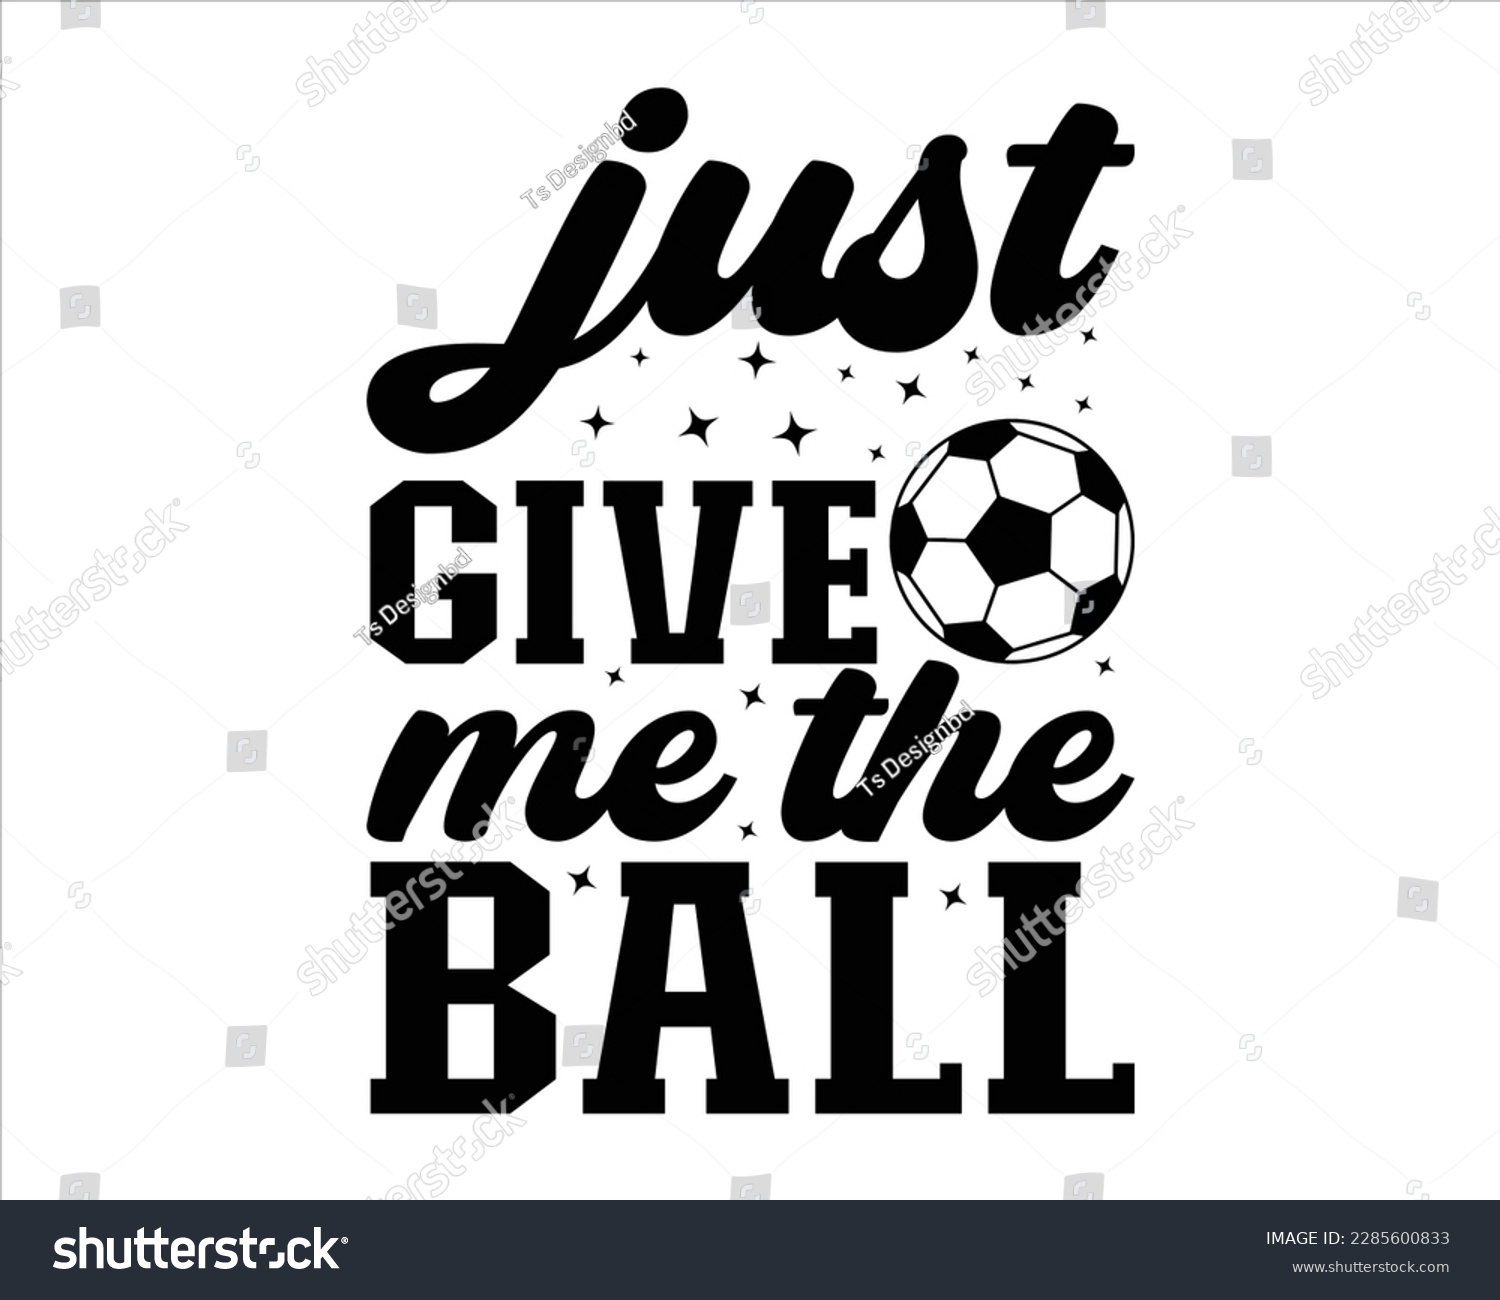 SVG of Just Give Me The Ball Svg Design,FootBall Svg,Soccer Ball Svg,Soccer Clipart,Sports, Cut File Cricut,Game Day Svg,Proud Soccer Svg,Retro Soccer Svg,Supportive Mom  svg,Soccer Saying Svg svg